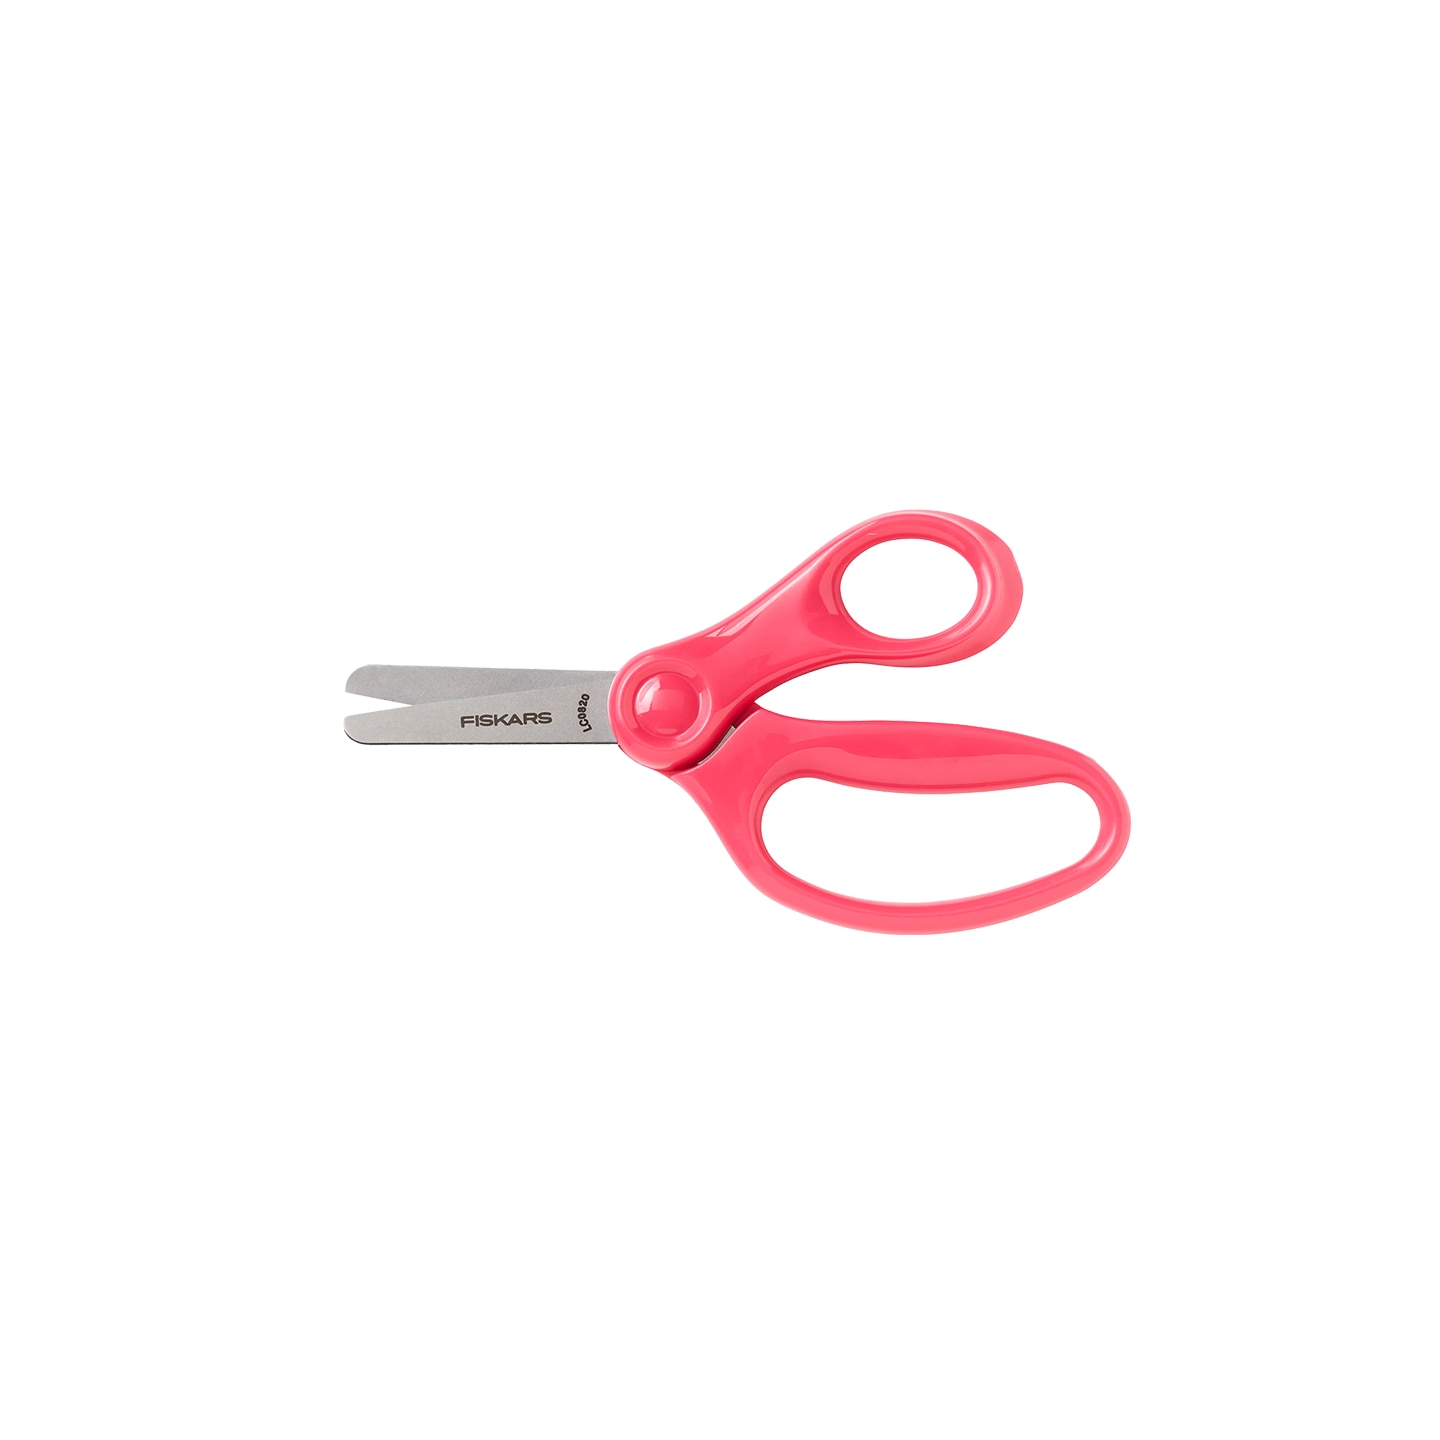 Children's Pink Safety Scissors with Soft Handle and Grips